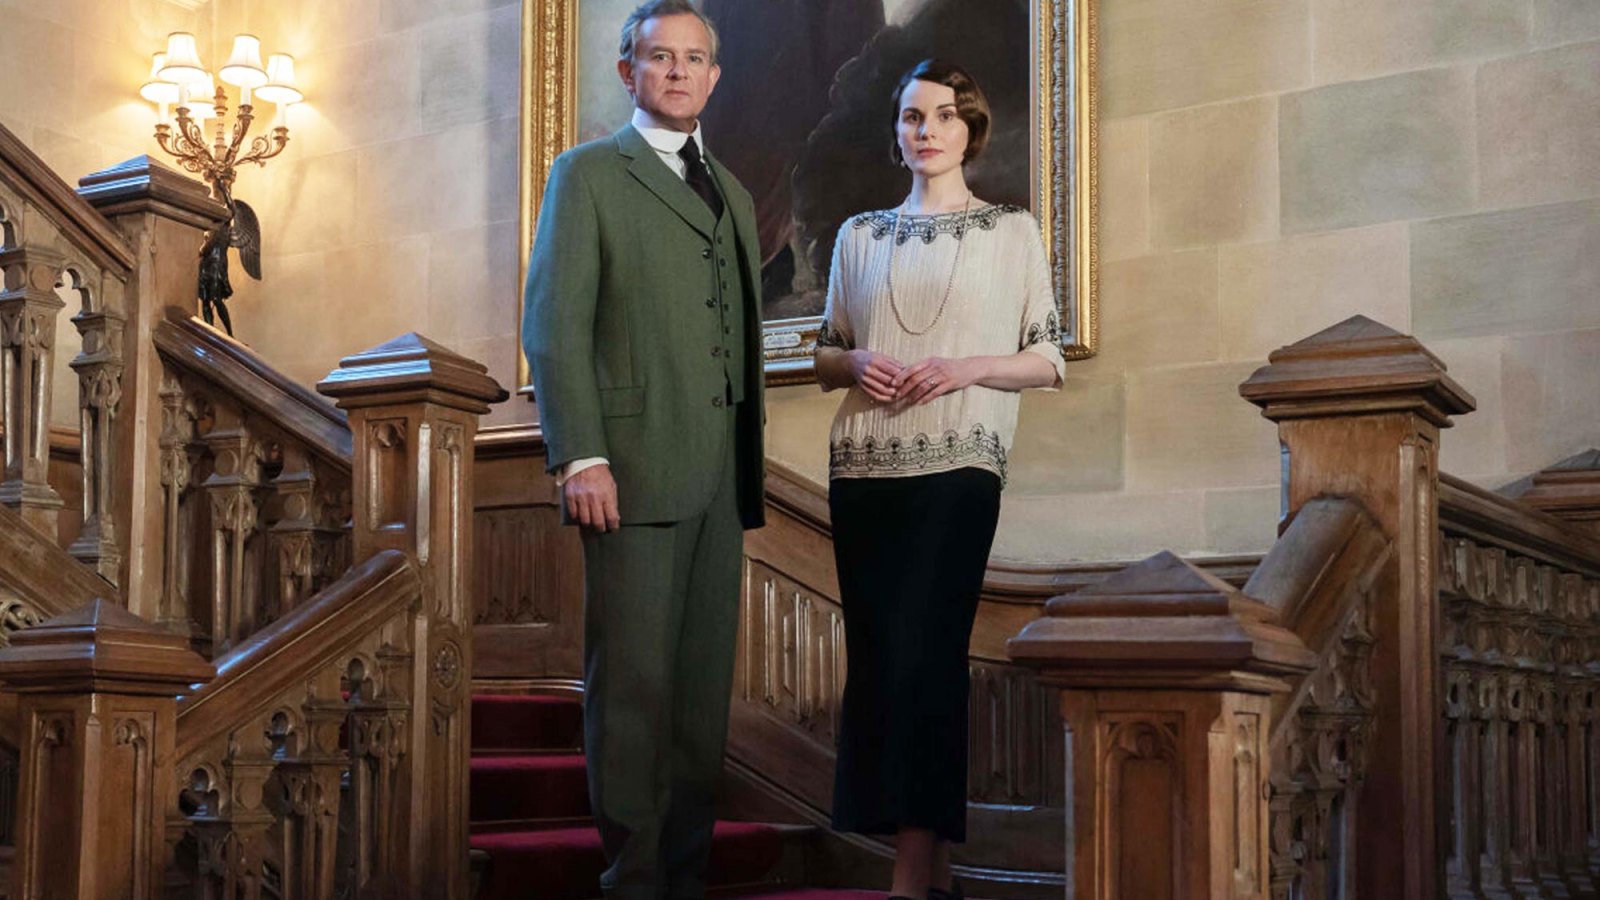 Downton Abbey 3 Is Happening With Paul Giamatti Joely Richardson and More